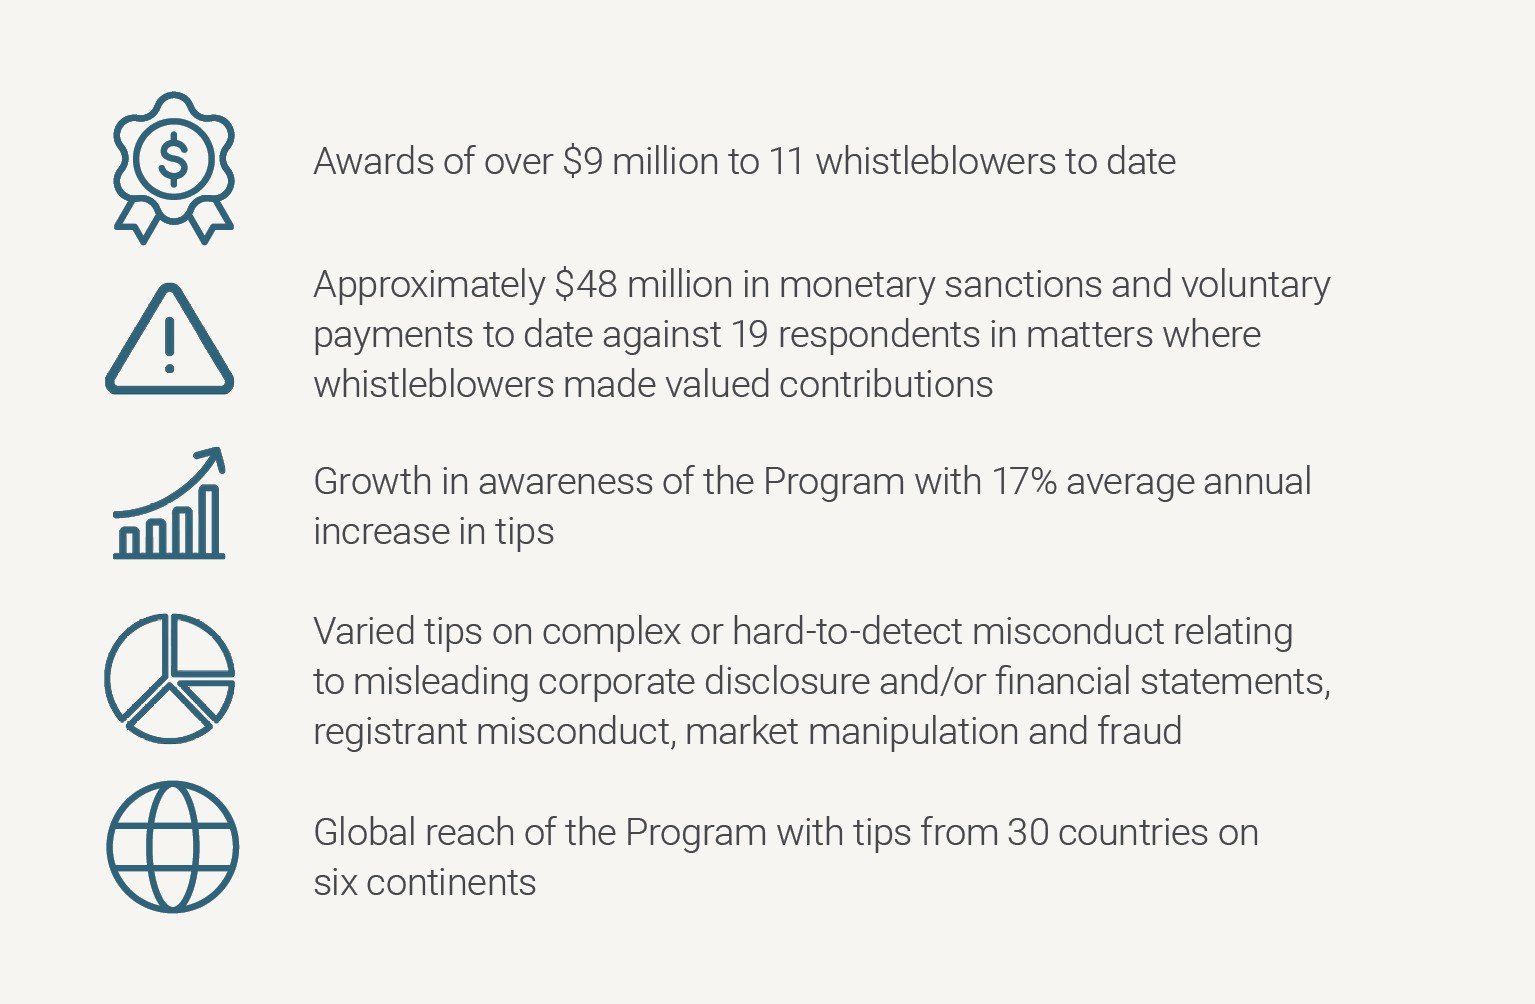 A list of five highlights of the OSC Whistleblower Program. The first highlight is: “Awards of over $9 million to 11 whistleblowers to date”. The second highlight is: “Approximately $48 million in monetary sanctions and voluntary payments to date against 19 respondents in matters where whistleblowers made valued contributions”. The third highlight is: “Growth in awareness of the Program with 17% average annual increase in tips”. The fourth highlight is: “Varied tips on complex or hard-to-detect misconduct r